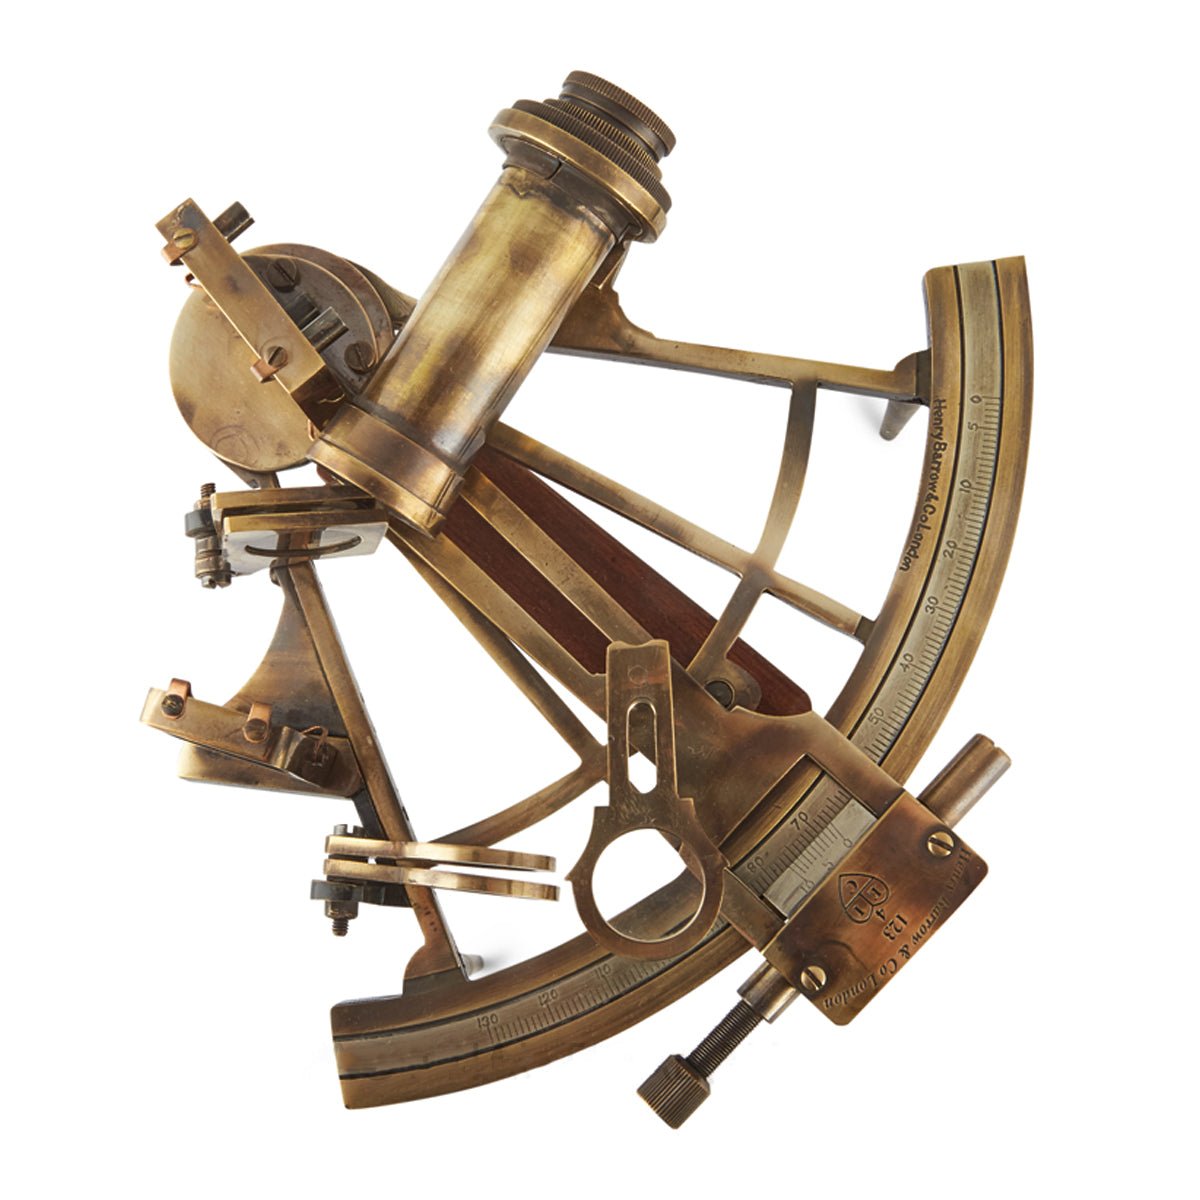 MALL INC. Sextant, Brass Hand-Made 9 Sextant